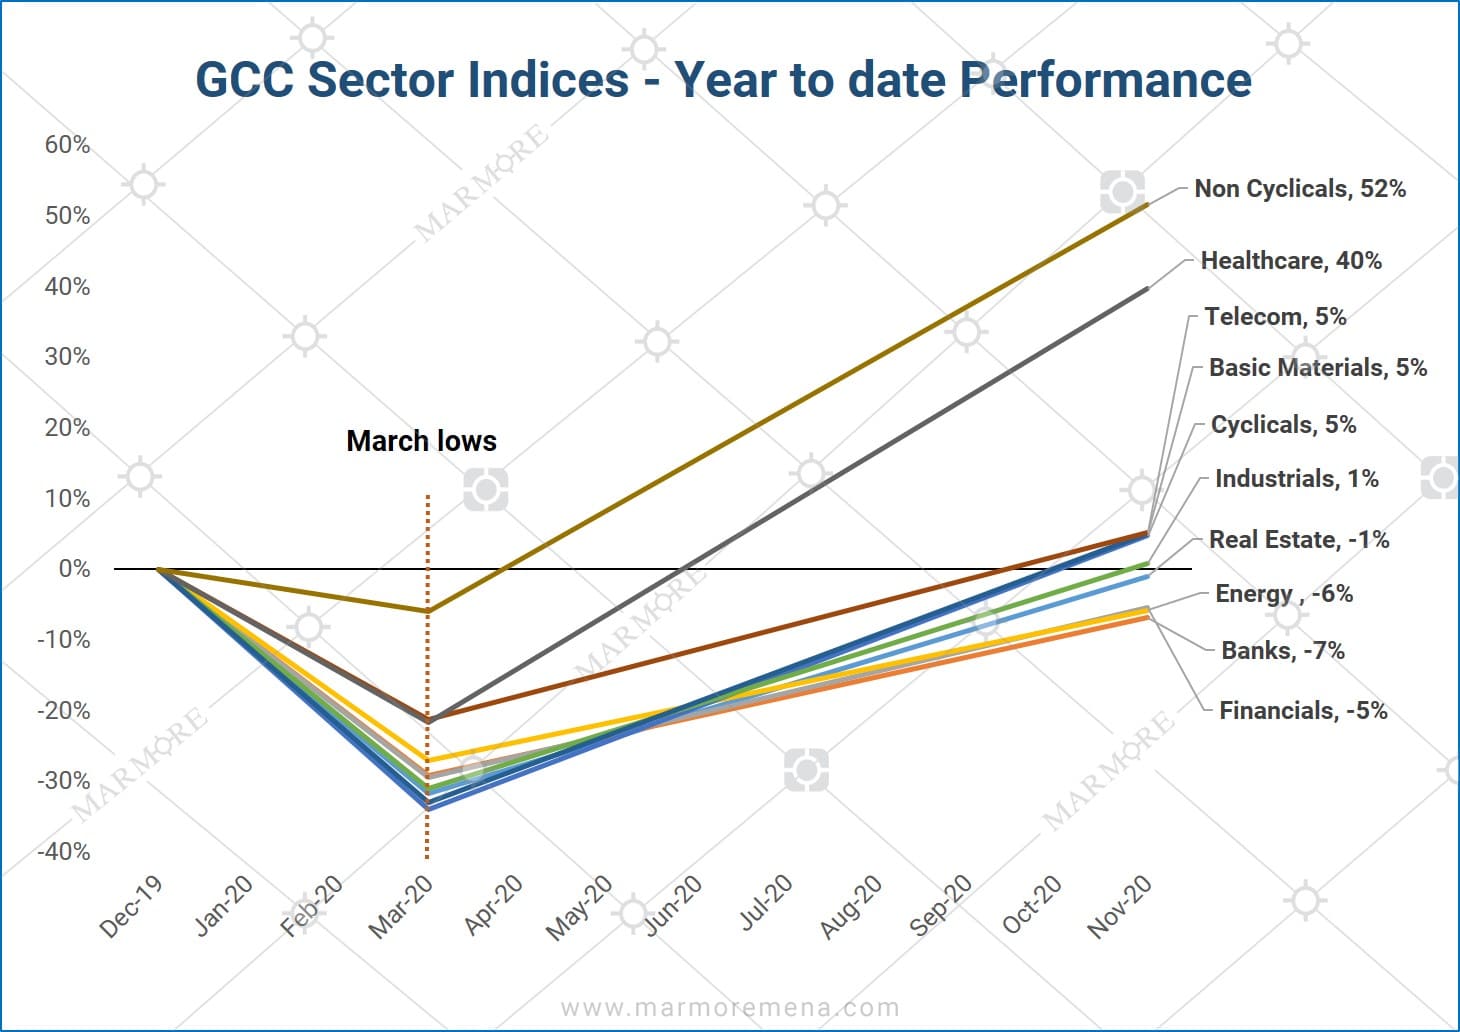 GCC Sector Indices - Year to Date Performance